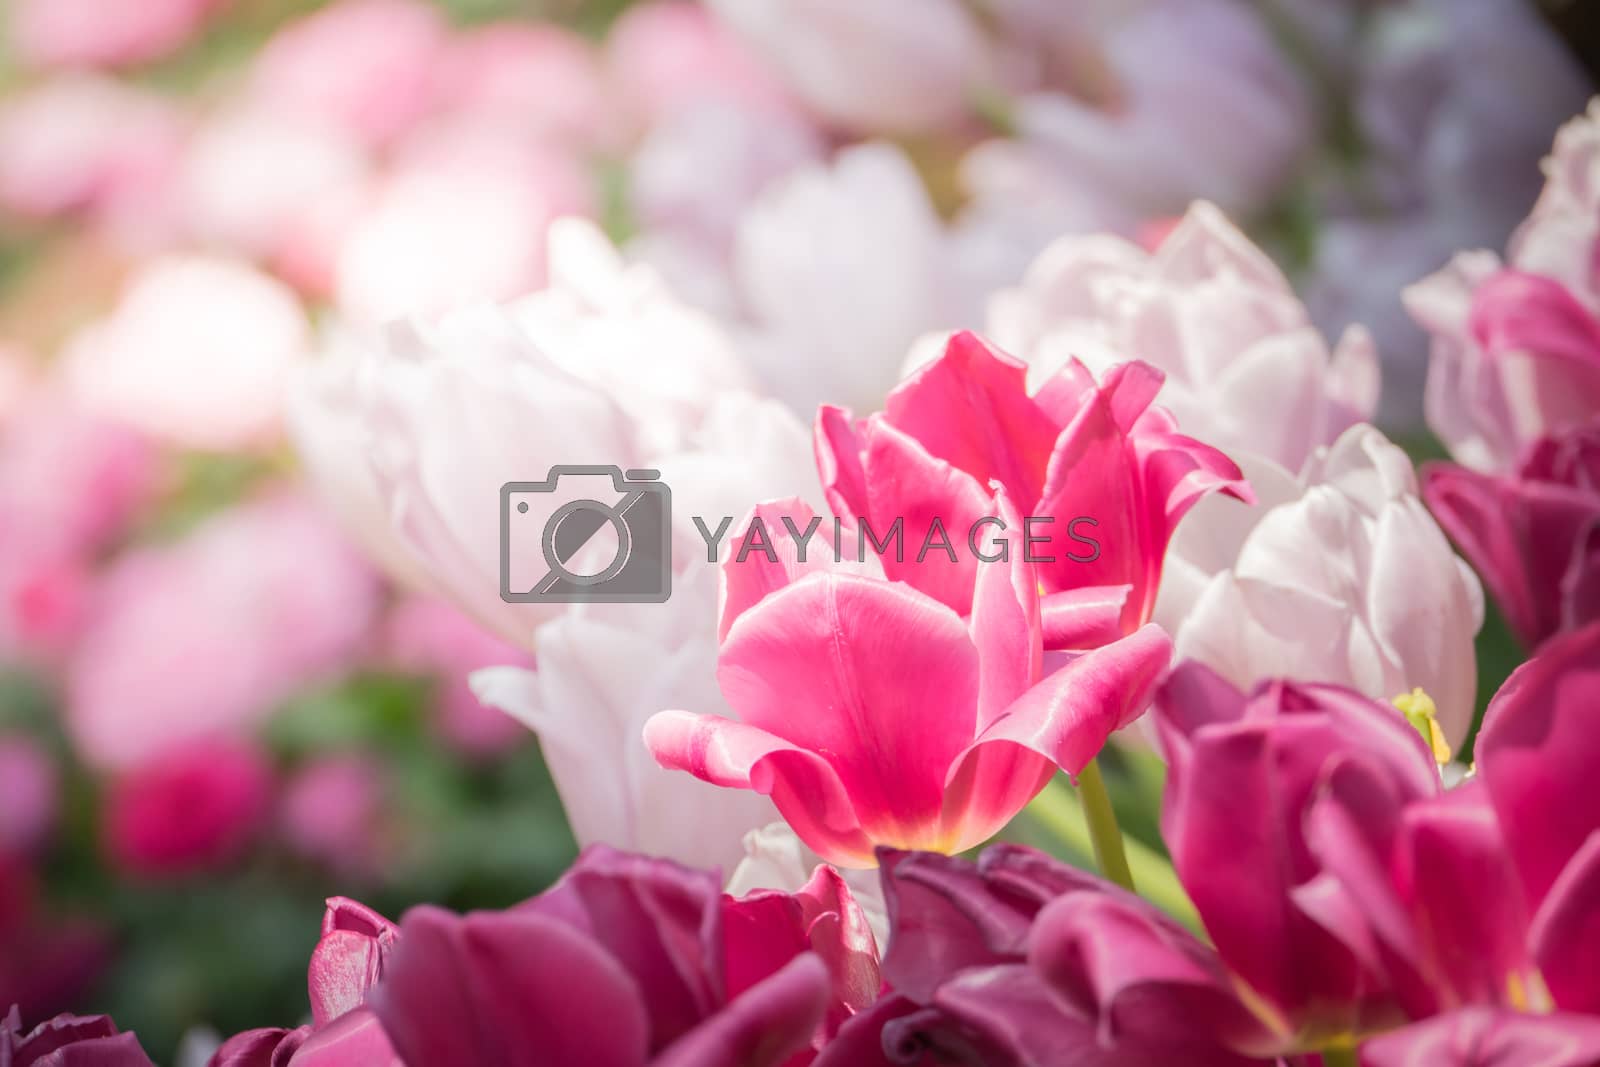 Royalty free image of Beautiful bouquet of tulips. colorful tulips. nature background by teerawit